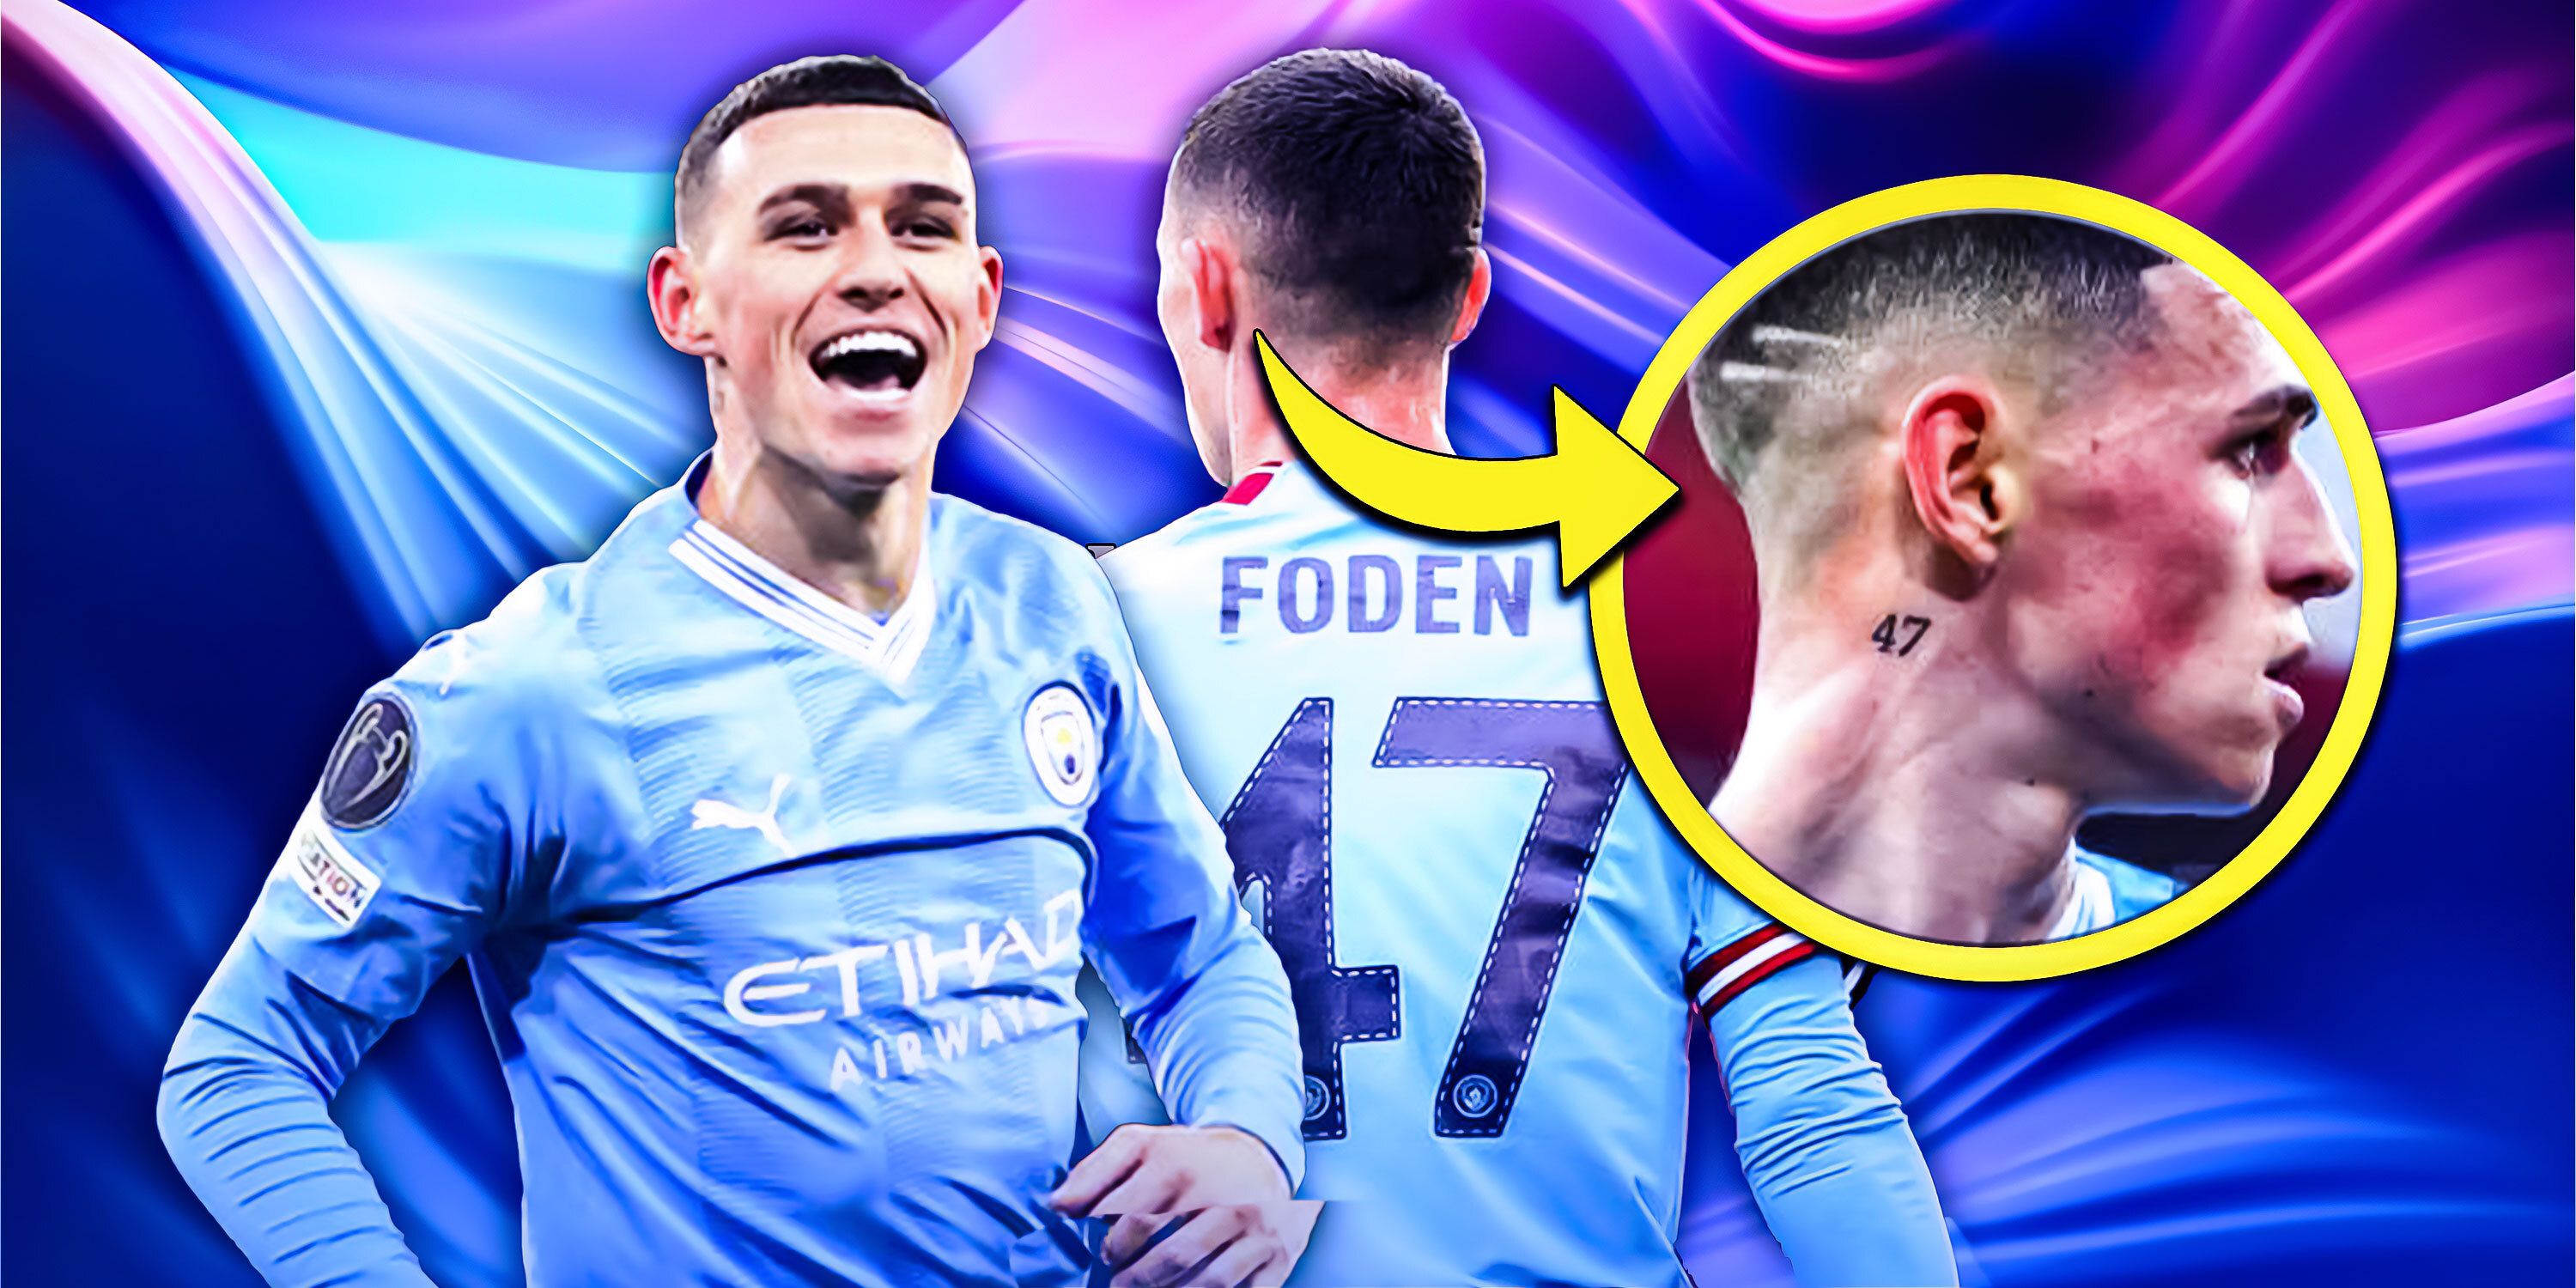 Why Phil Foden Wears Number 47 and has Tattoo